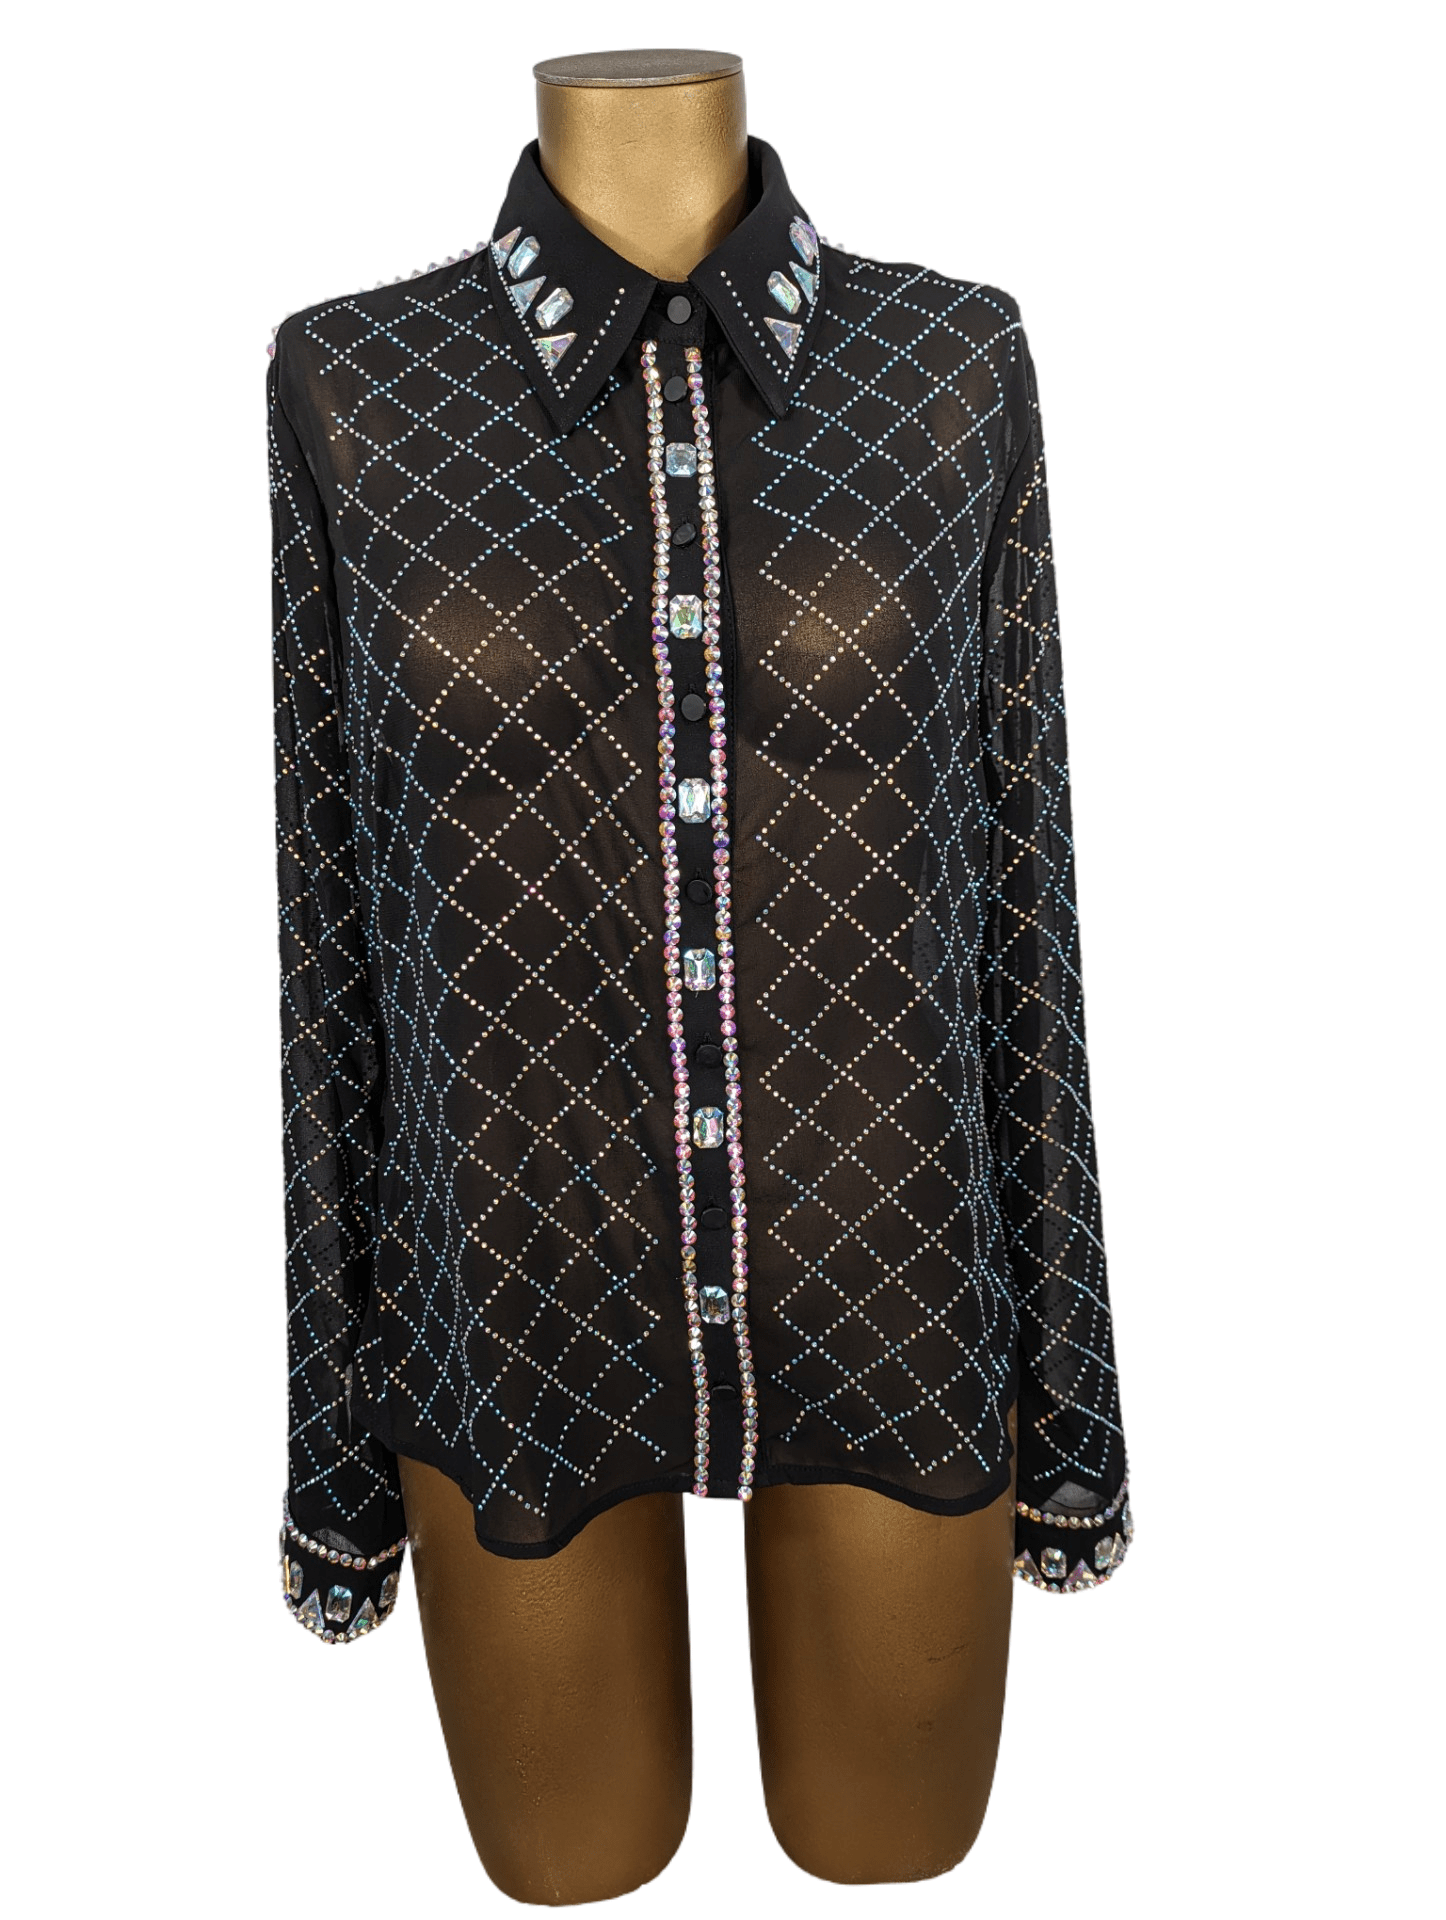 sparkle-ridge-womens-western-wear-affordable-show-clothes-horse-shirts-with-bling-rodeo-bodysuit-black-diamond-glitz-front.png